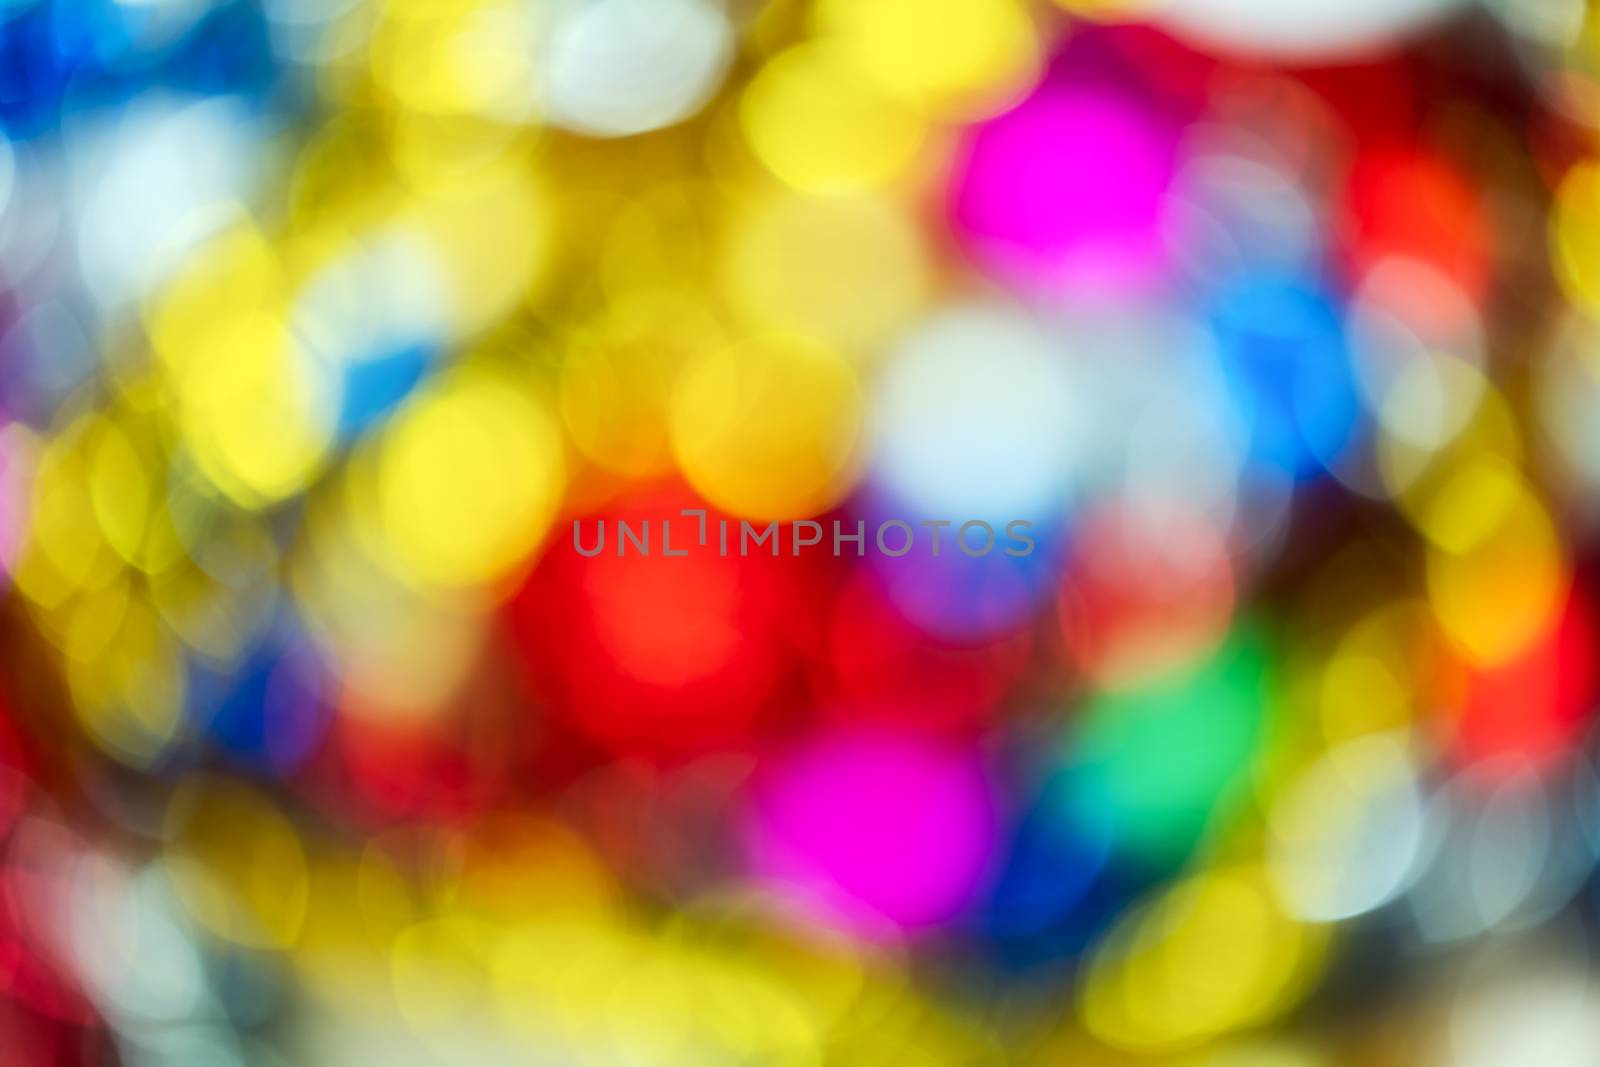 Blurred beautiful Happy New Year holiday decorations, colorful abstract bokeh background effect glowing Christmas lights by Alexander-Piragis